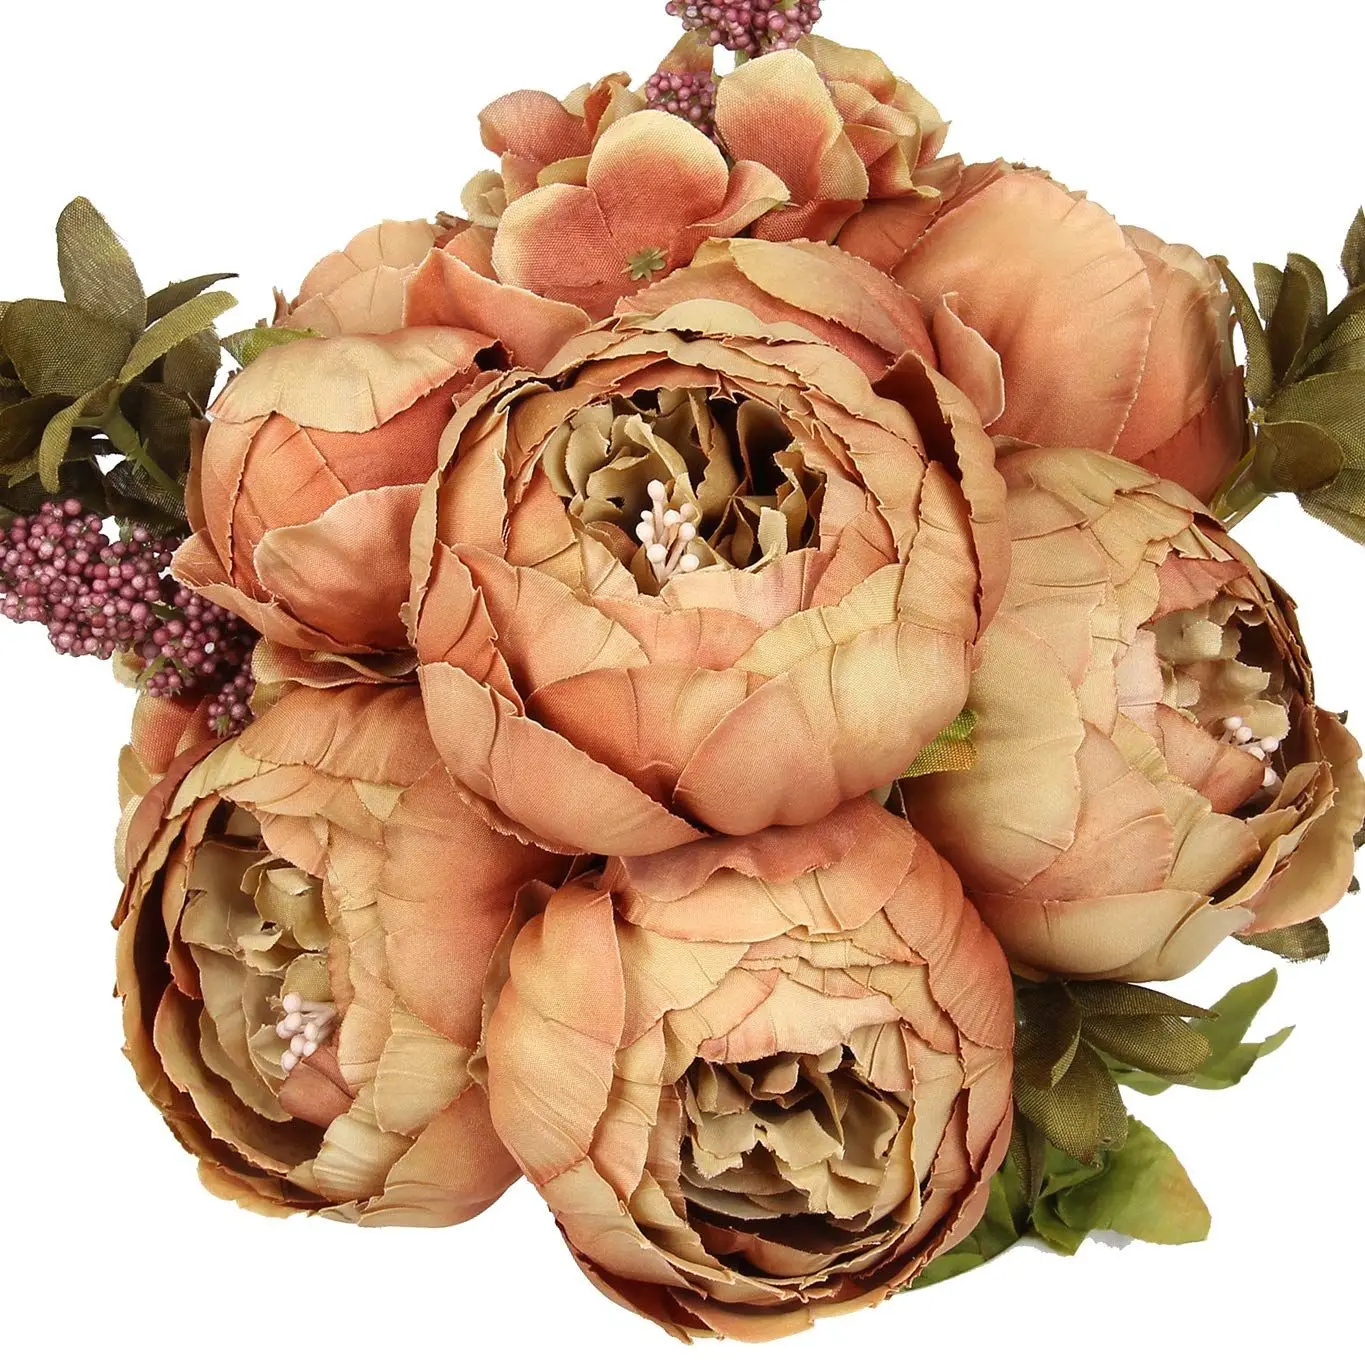 3 Head Round wholesale silk peony artificial flower wedding centerpieces table decorations